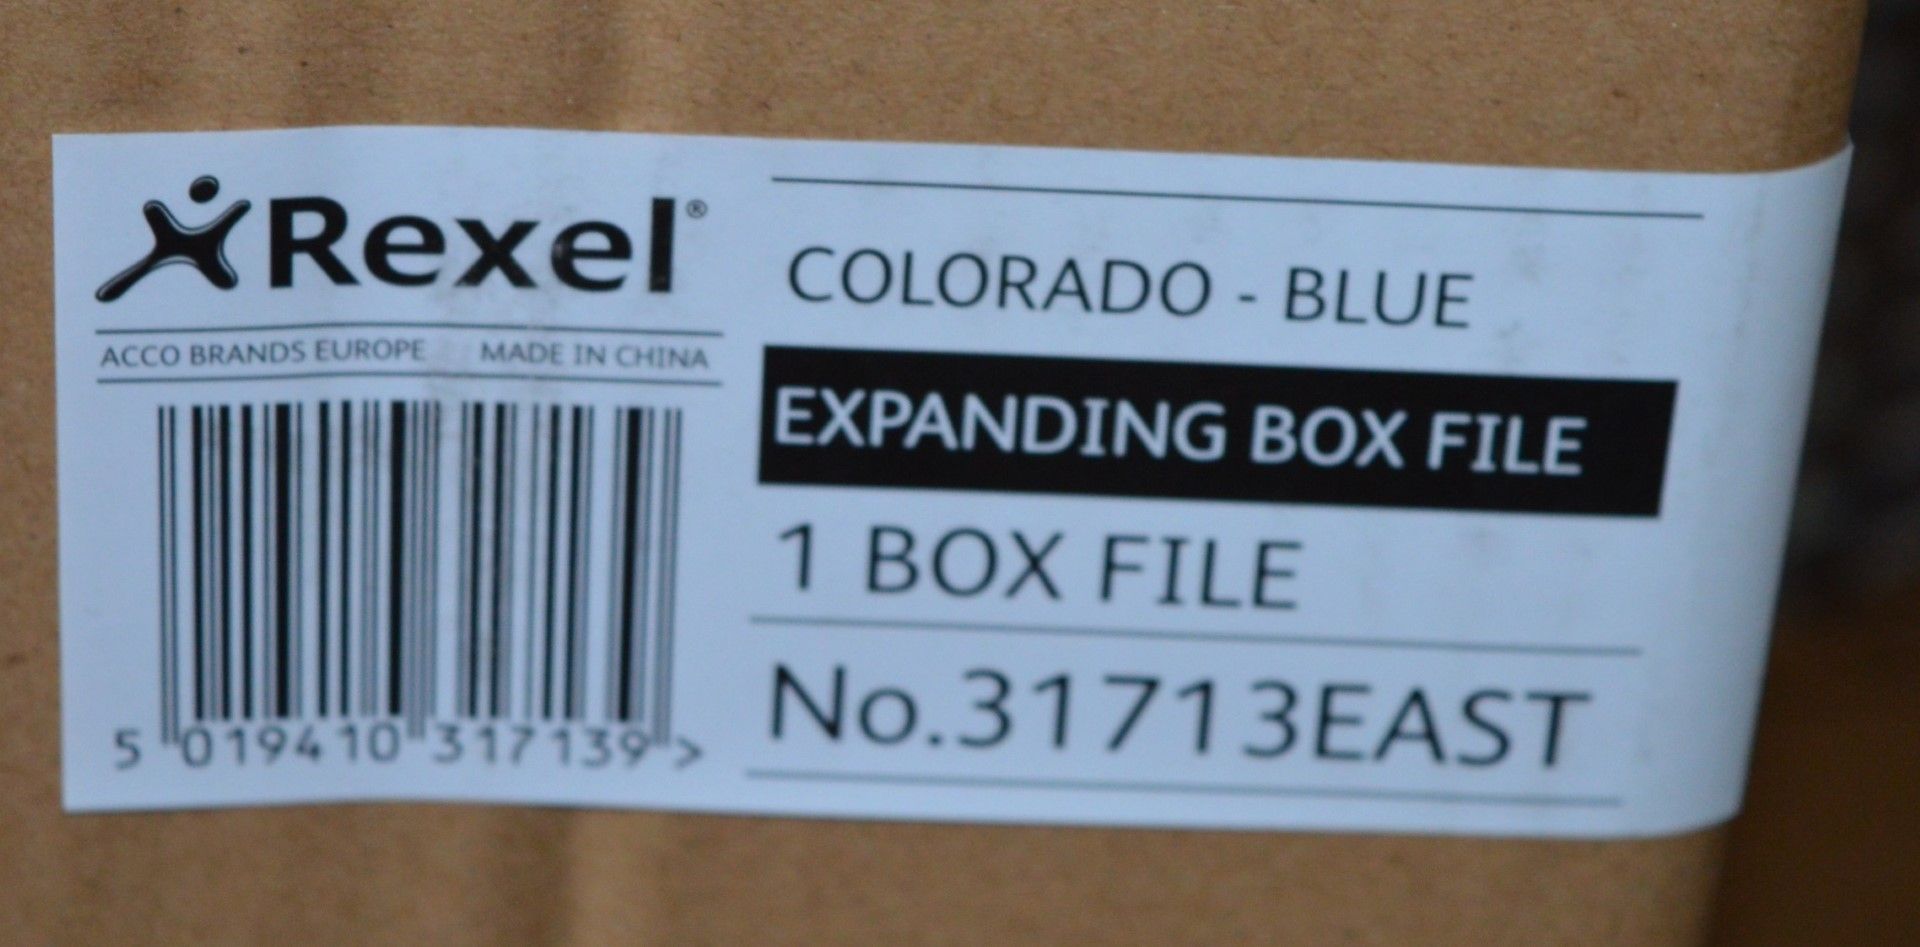 2 x Rexel Colorado Expanding Document Box Files - Blue Colour - Product Code 31713EAST - Brand New - Image 2 of 5